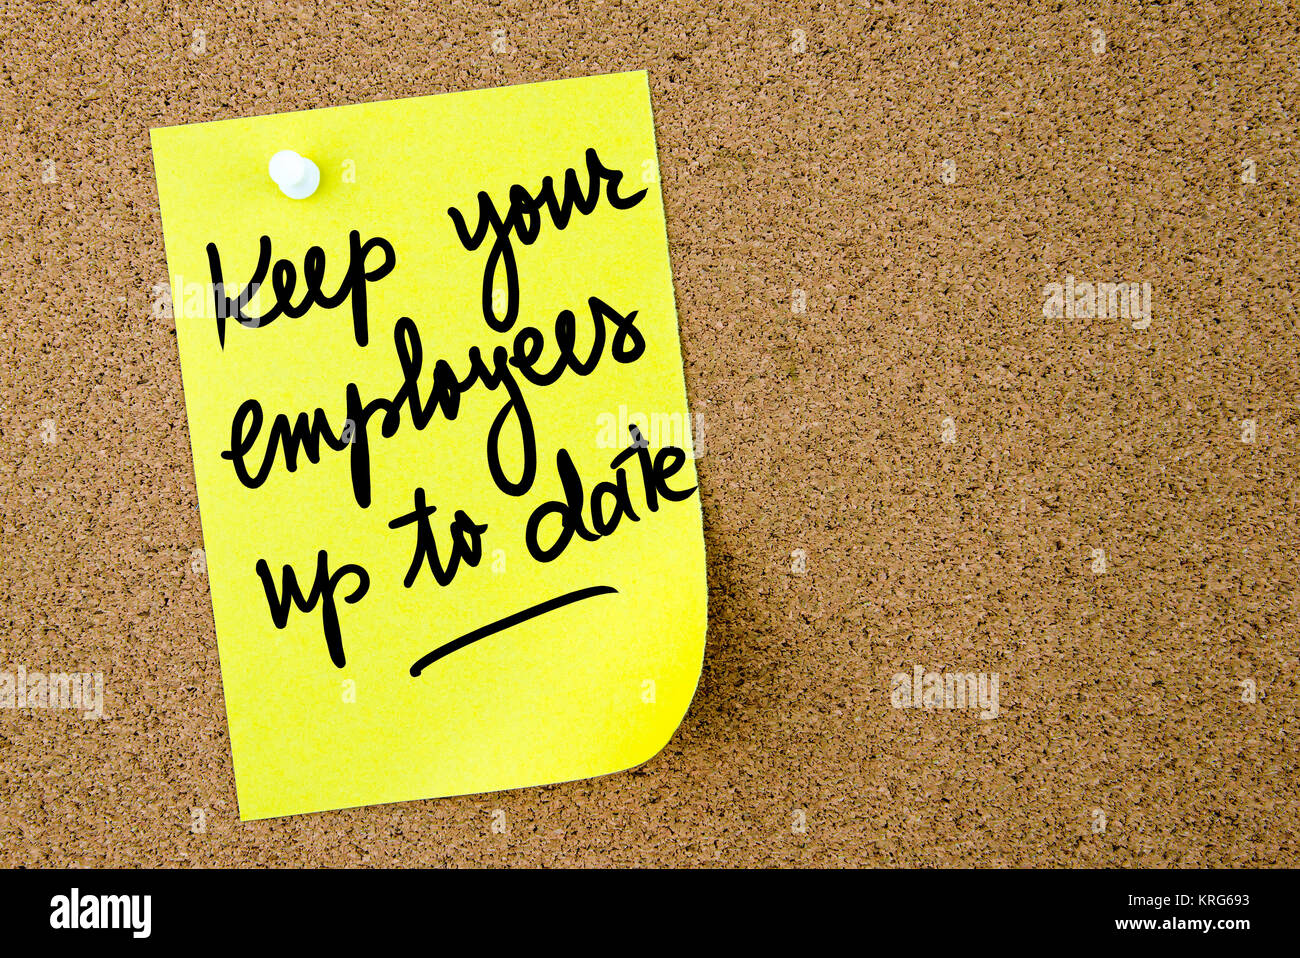 Keep Your Employees up to date text written on yellow paper note Stock Photo